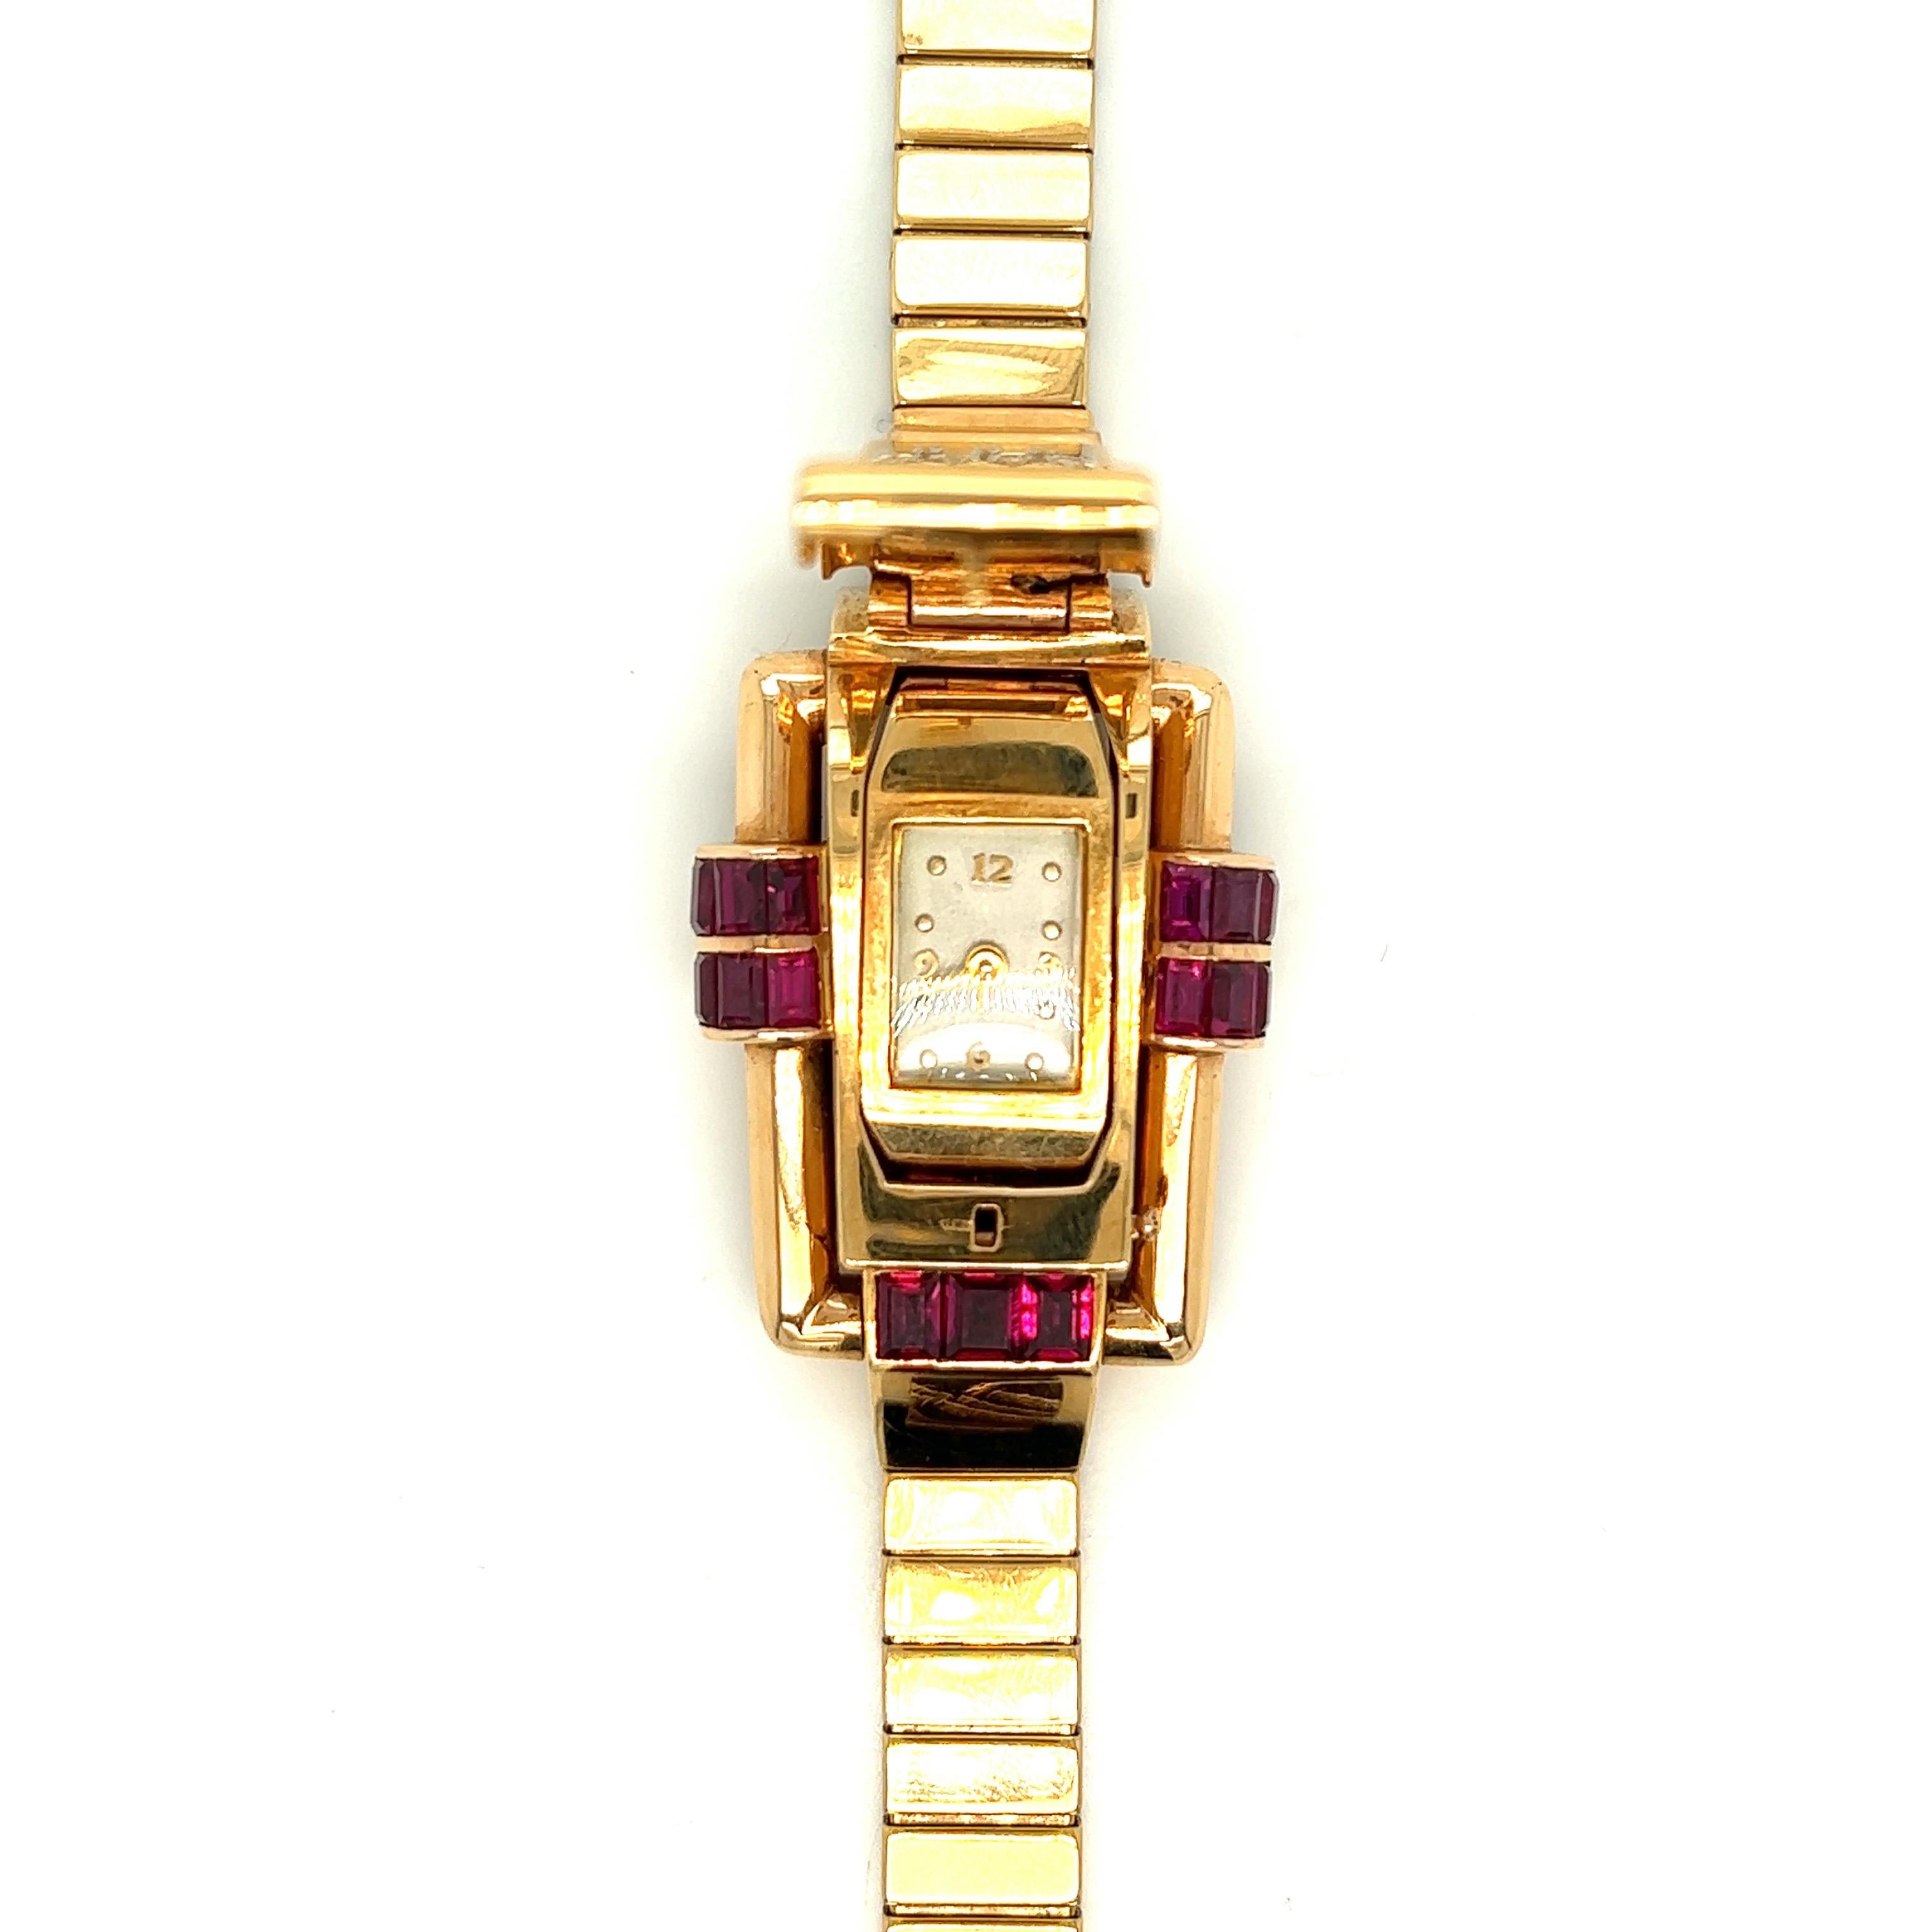 Oscar Heyman retro ruby and diamond watch

Concealed flip dial of mechanical movement, rectangular dial with gold Arabic numbers, and dot markers; calibré-cut rubies and round brilliant-cut diamonds of approximately 0.35 carat; 18 karat rose gold